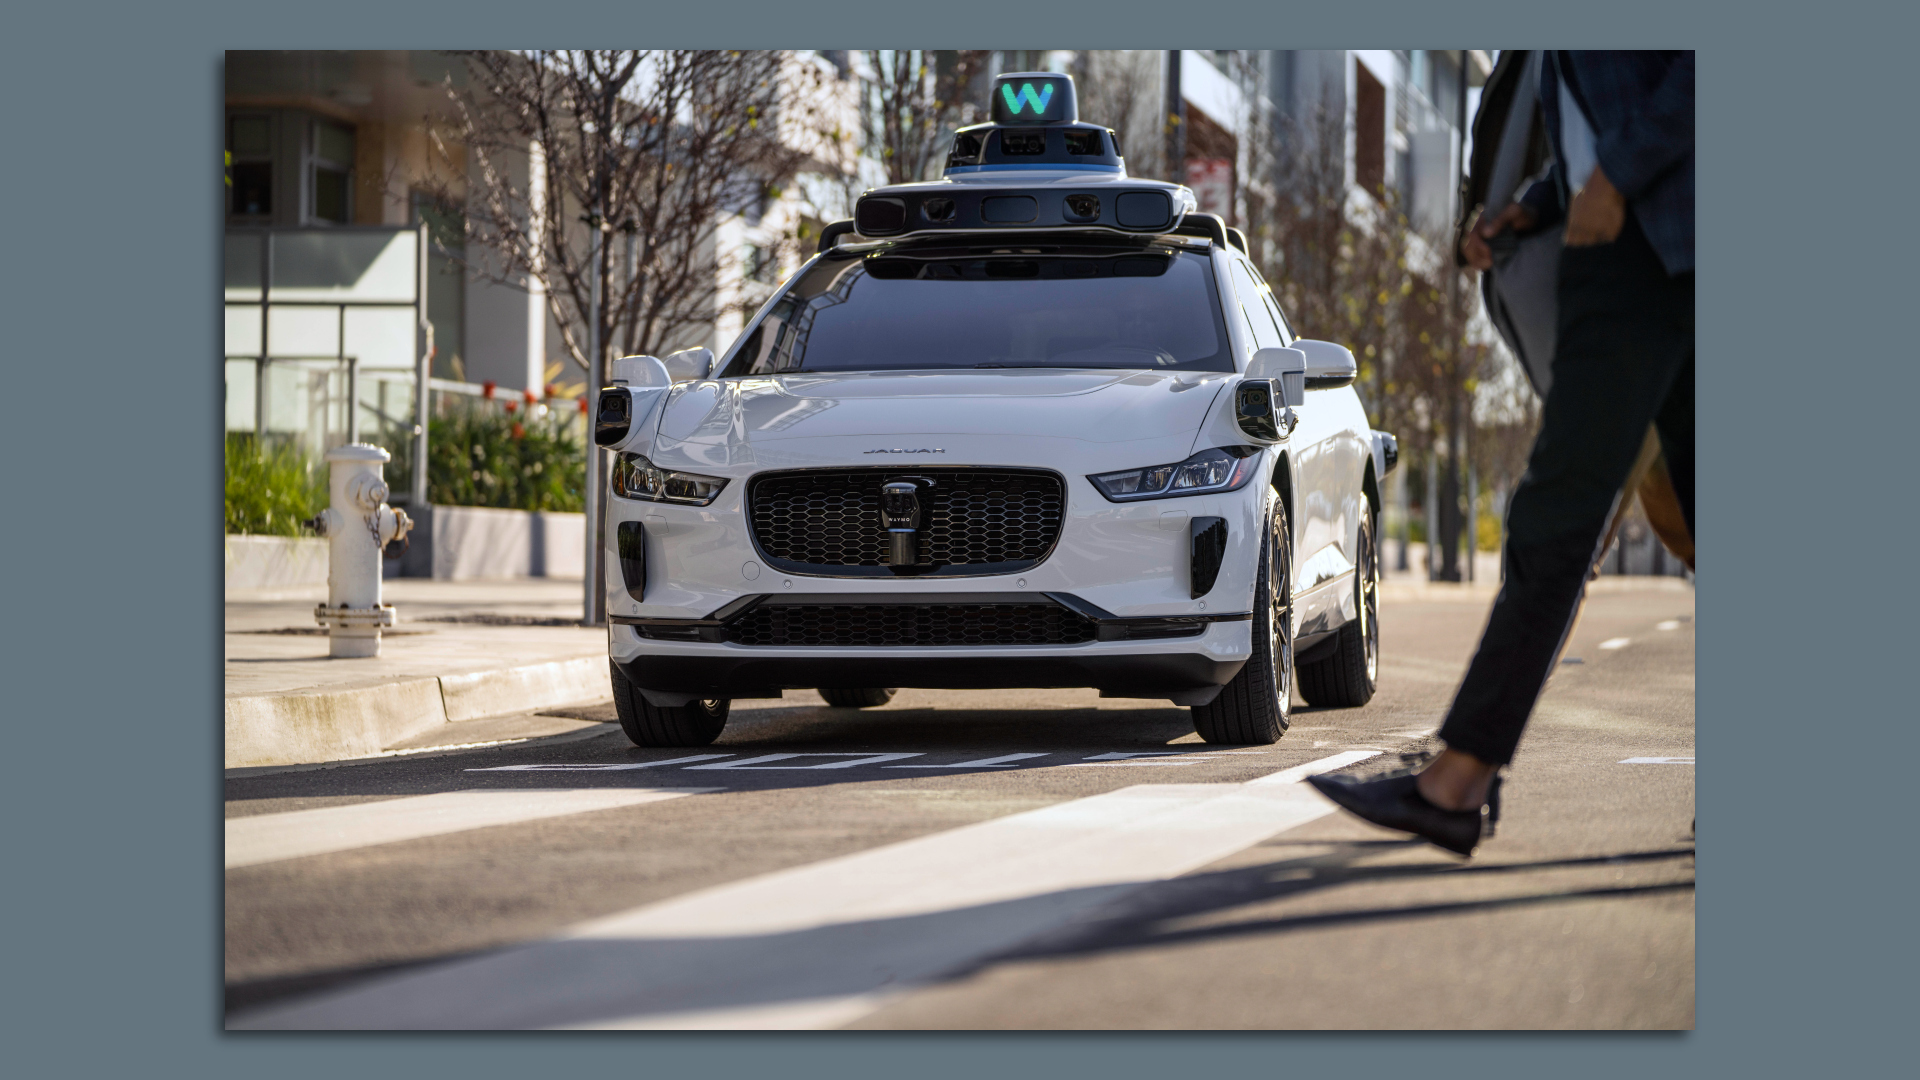 Image of a pedestrian walking in front of a driverless Waymo vehicle.